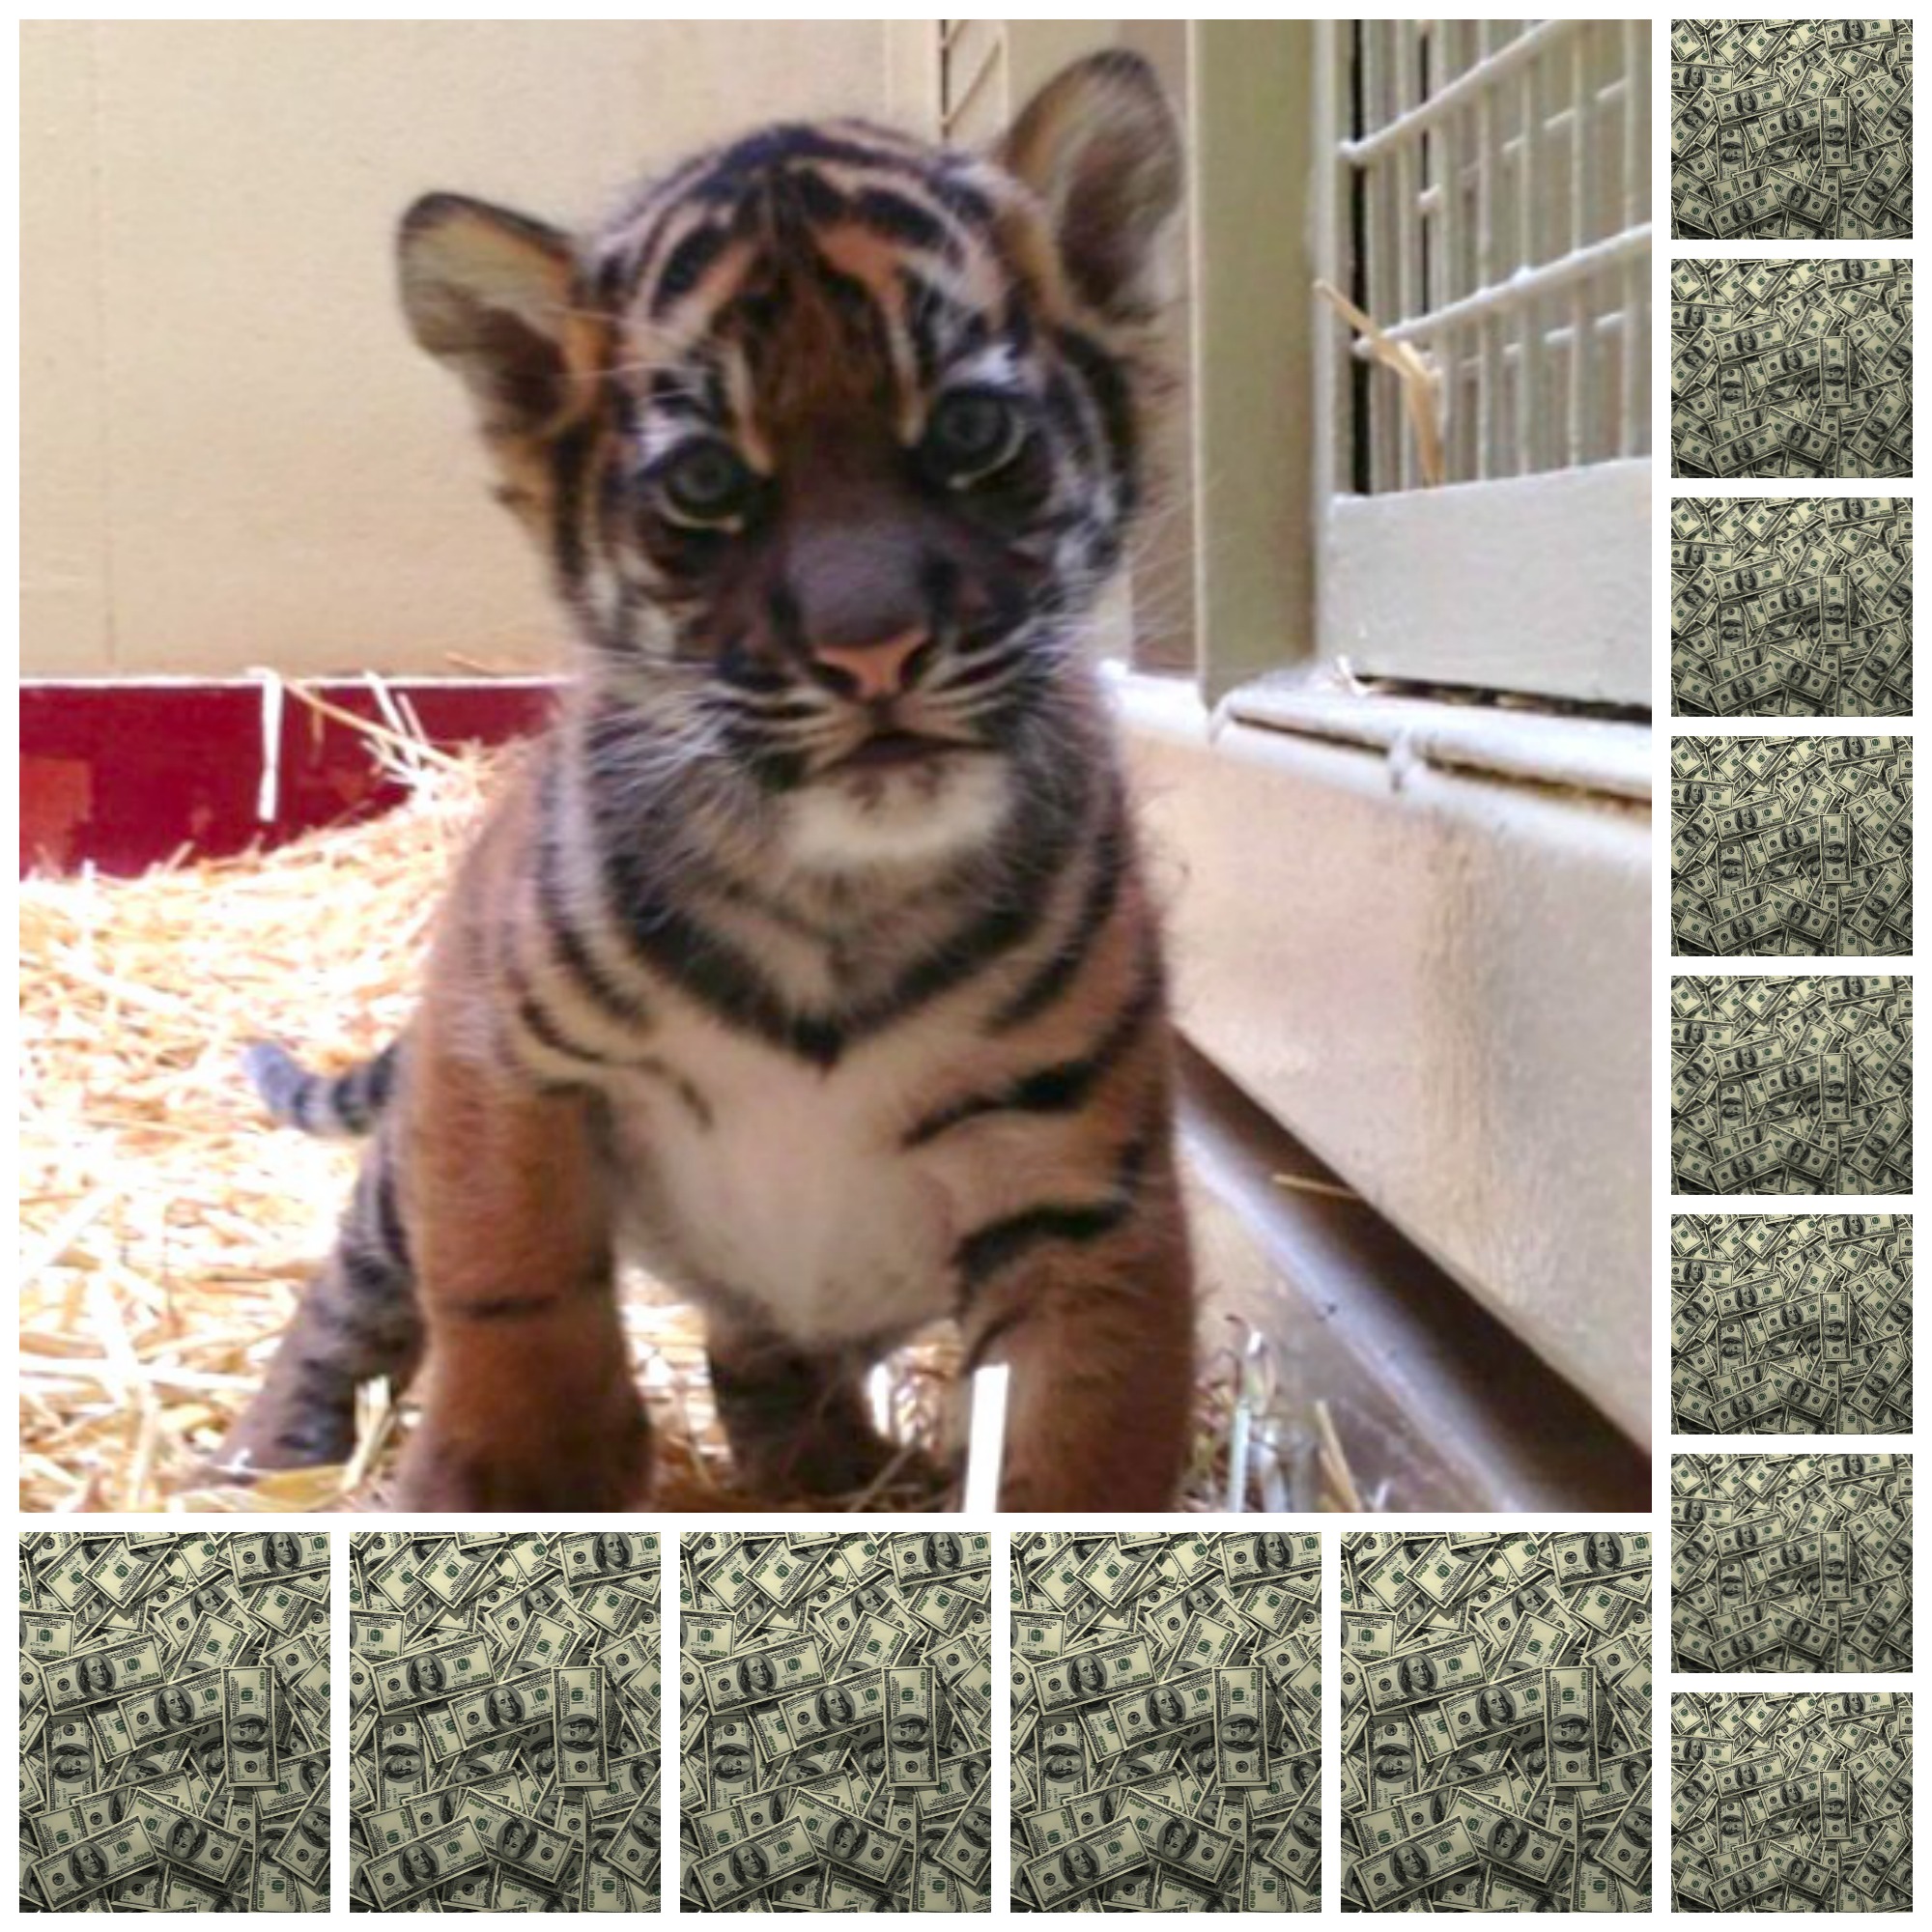 Literary Agent Names SF Zoo's Baby Tiger After Herself (For $47,000)